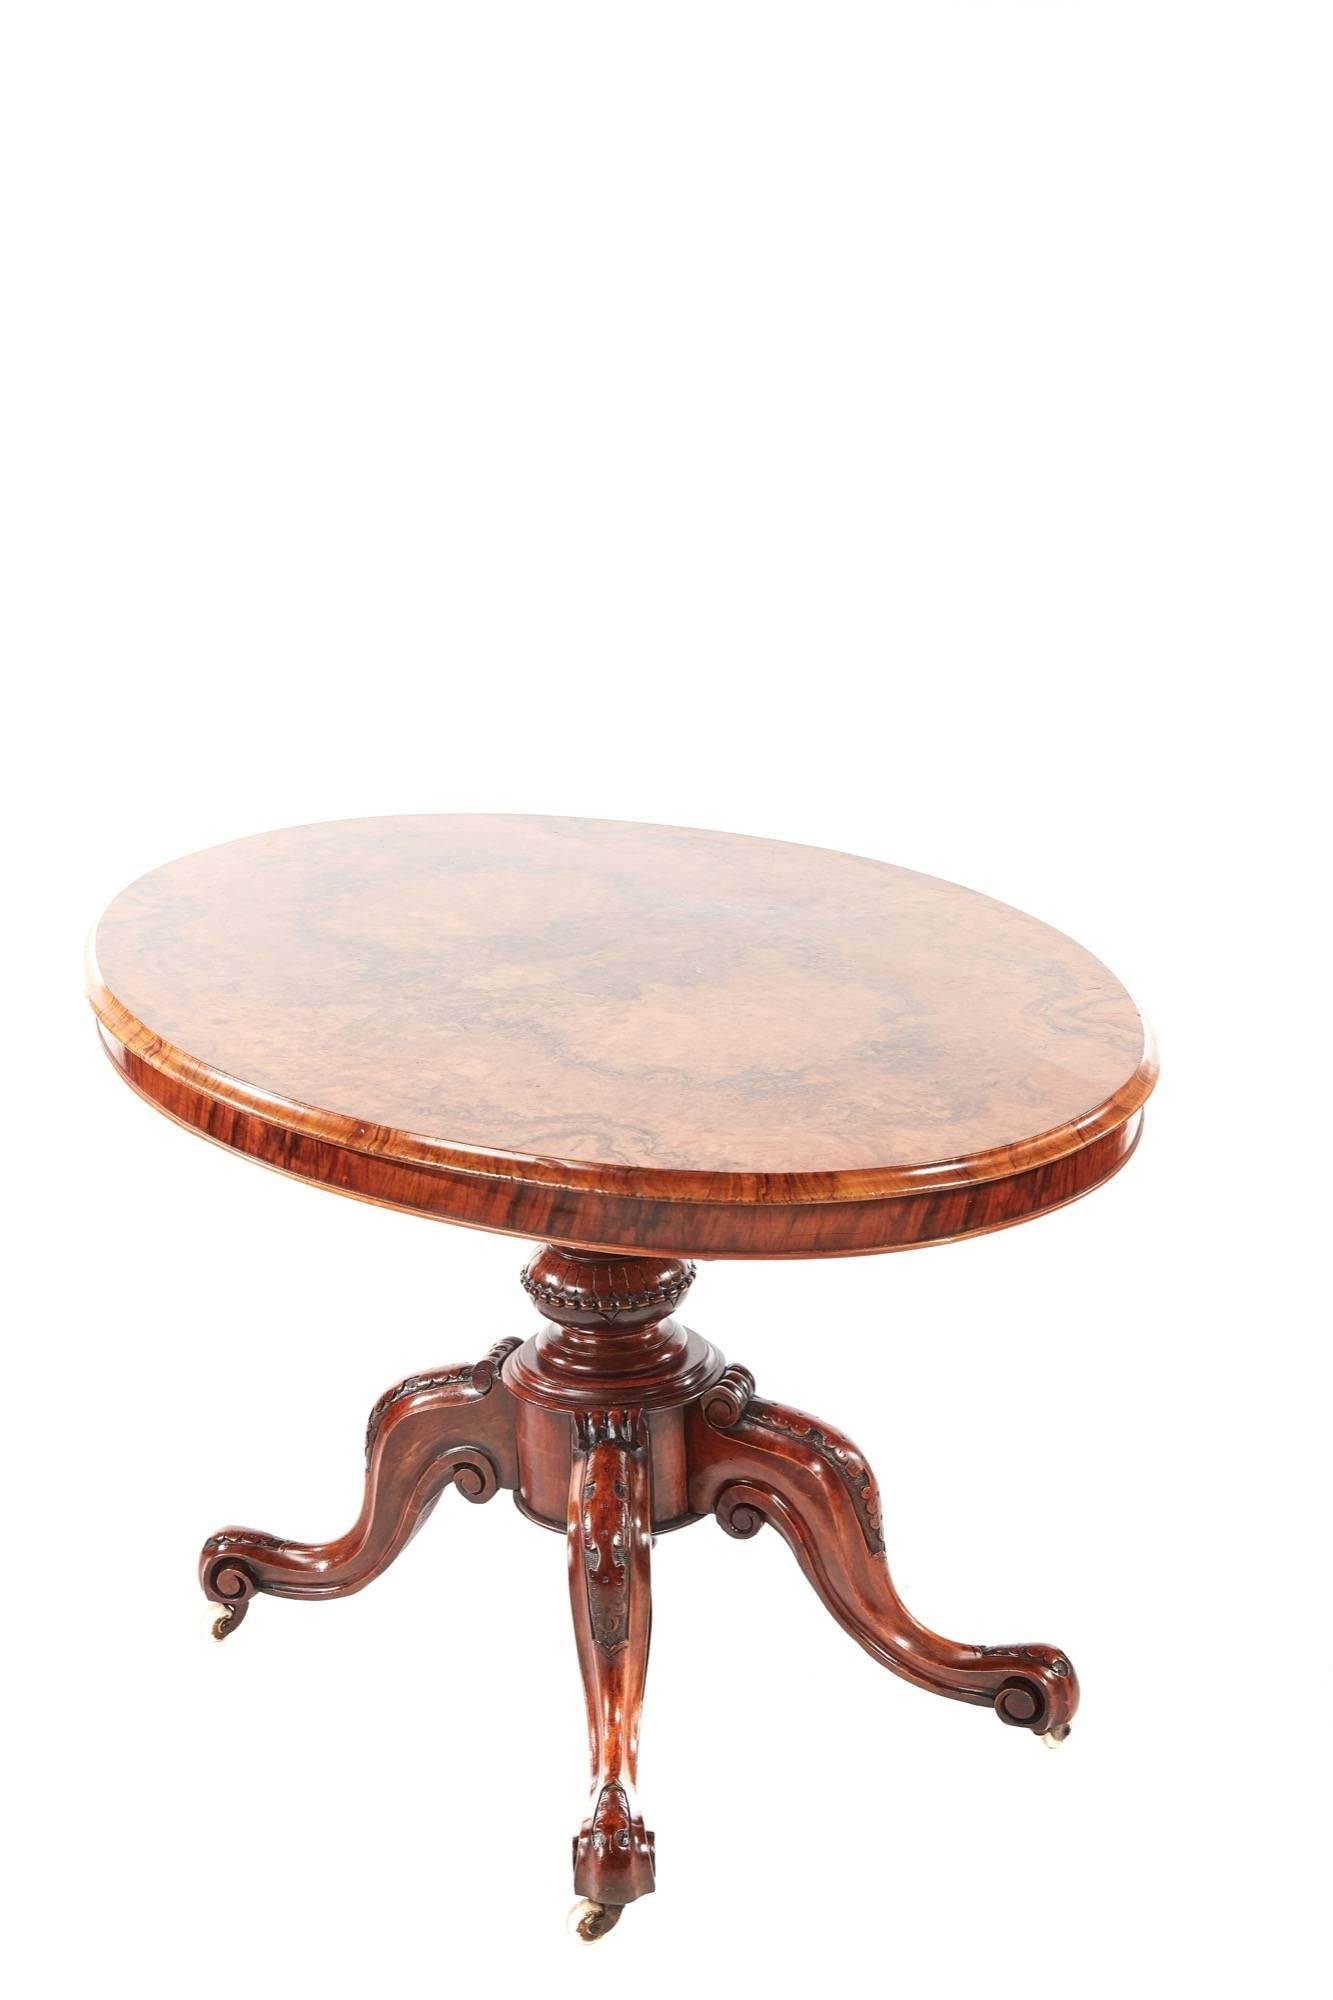 Fine quality oval Victorian burr walnut centre table, the tilt top having fantastic matched burr walnut veneers with thumb moulded edge, solid walnut base with a carved shaped centre column supported on four carved solid walnut shaped cabriole legs